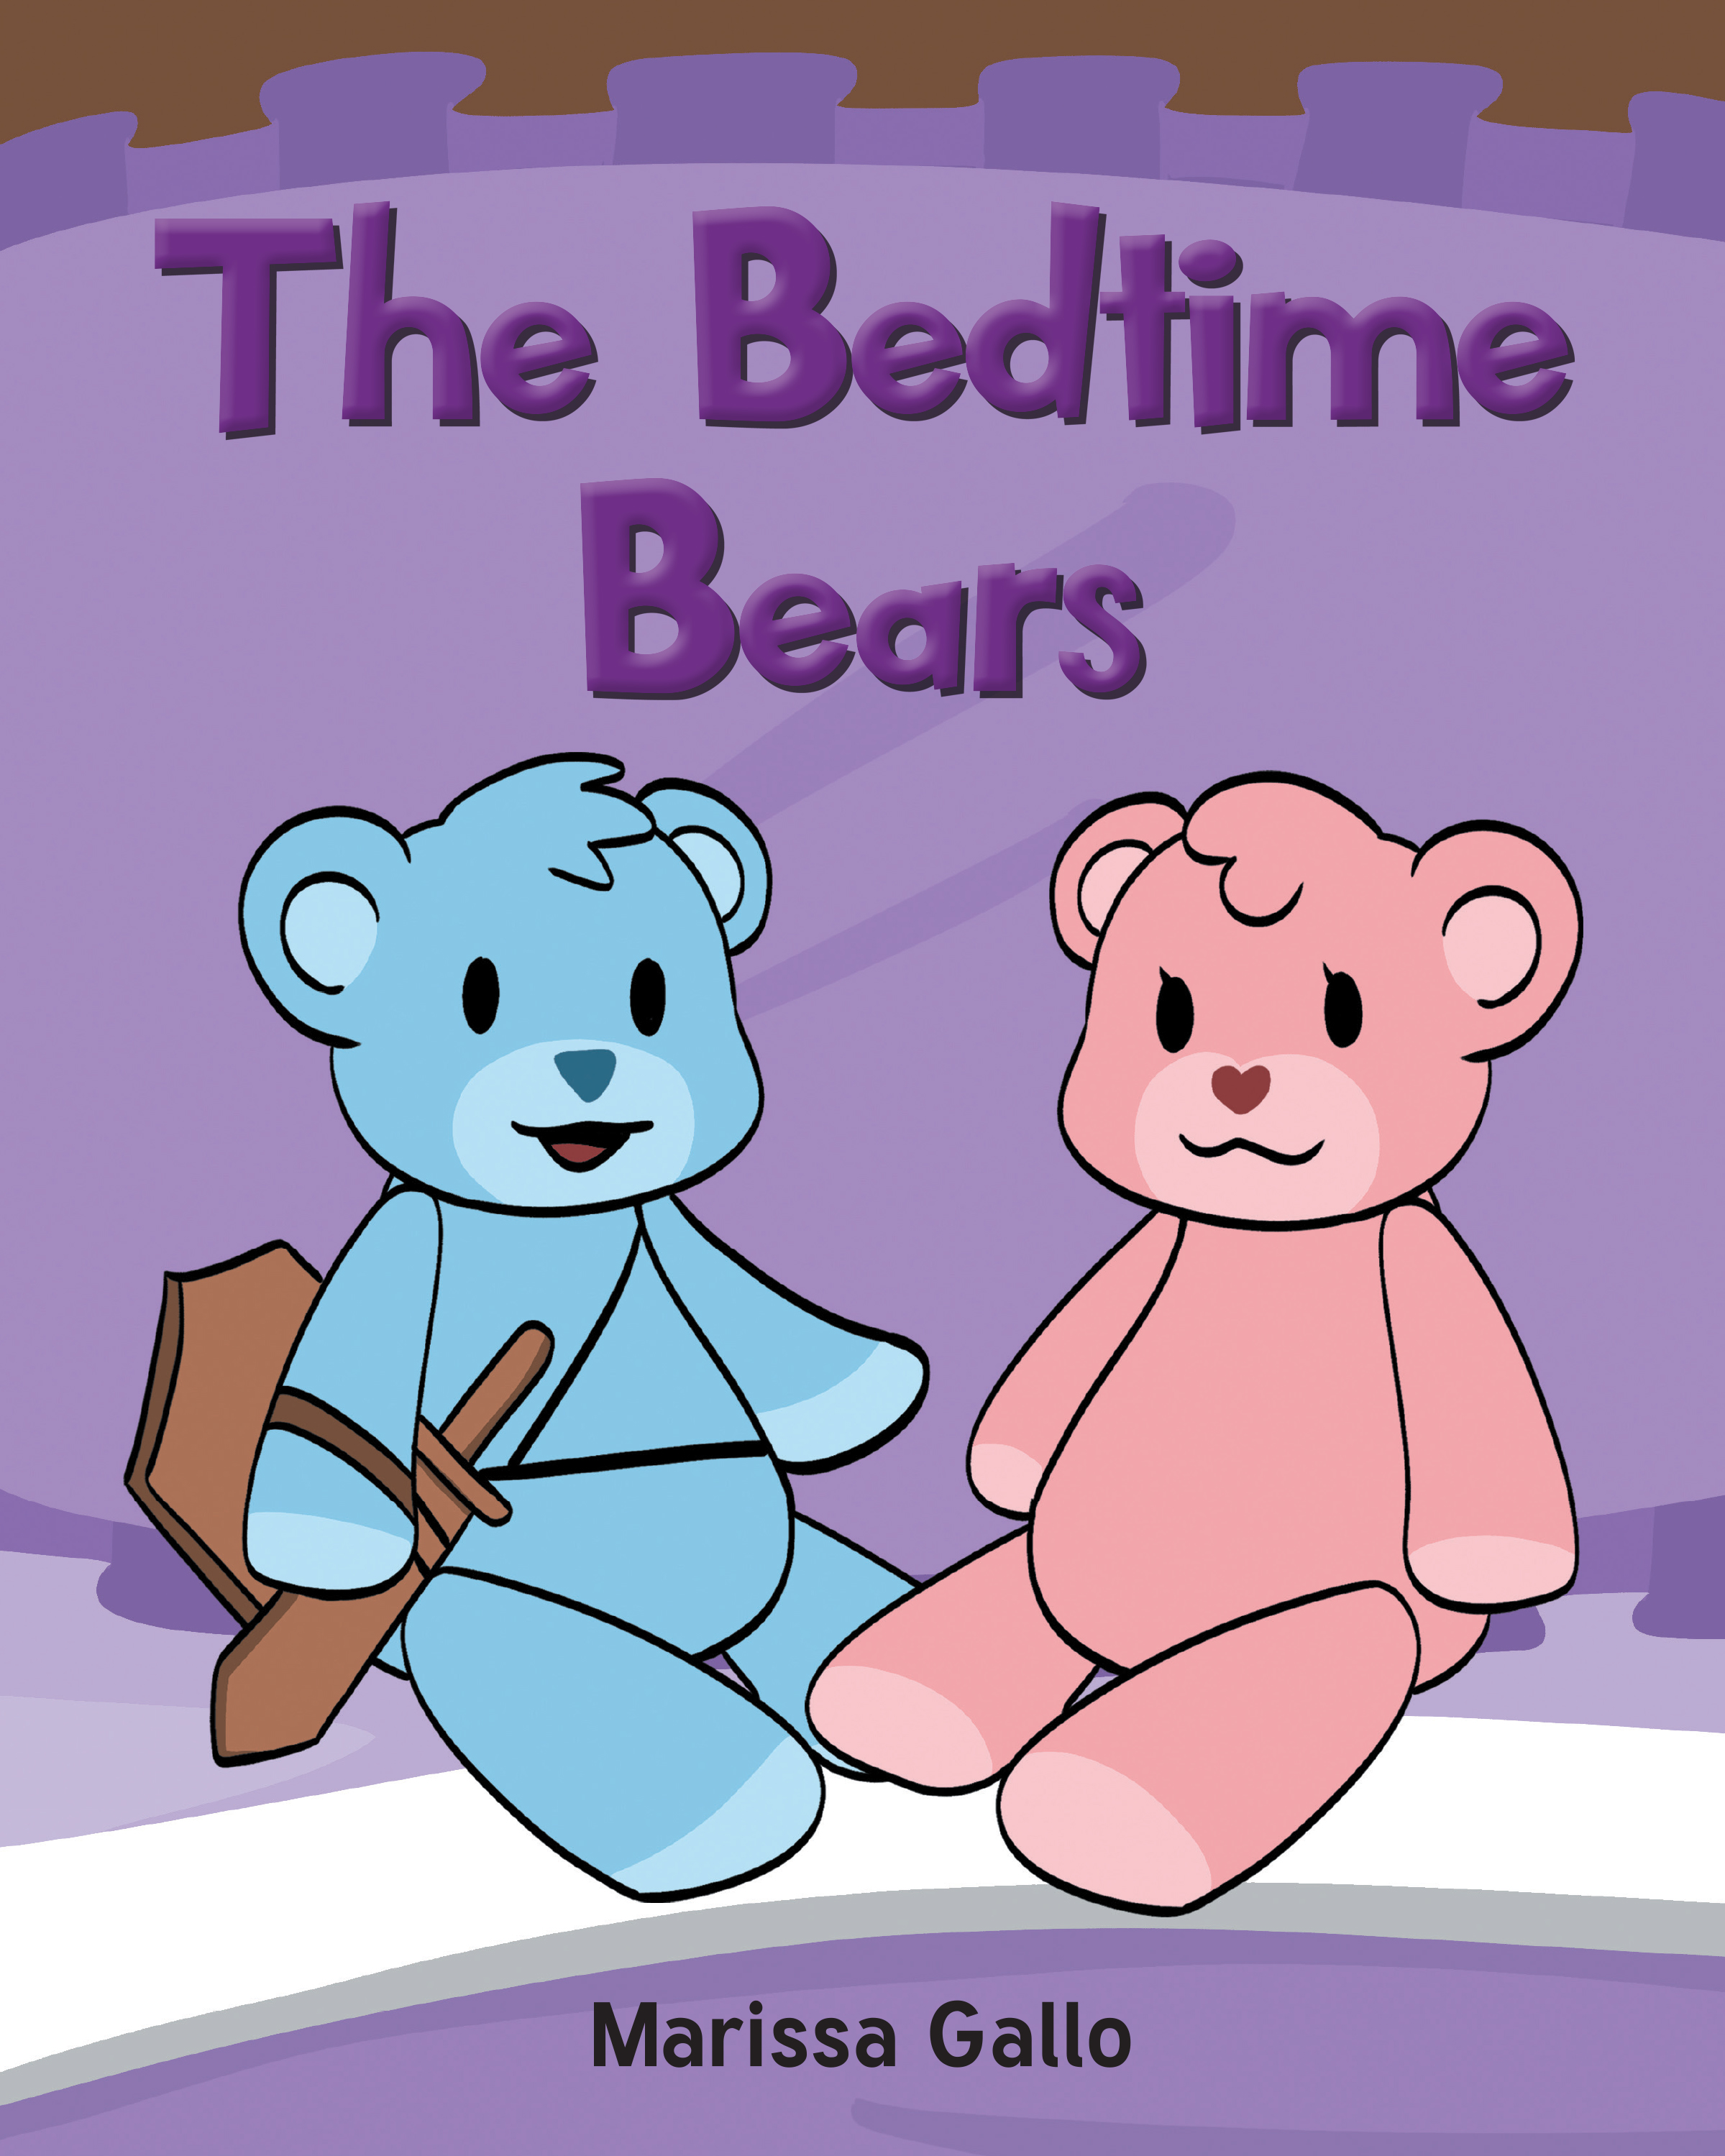 Author Marissa Gallo’s New Book, "The Bedtime Bears," is an Adorable Story of a Young Girl Who, with the Help of Two Special Friends, Manages to Overcome Her Fears